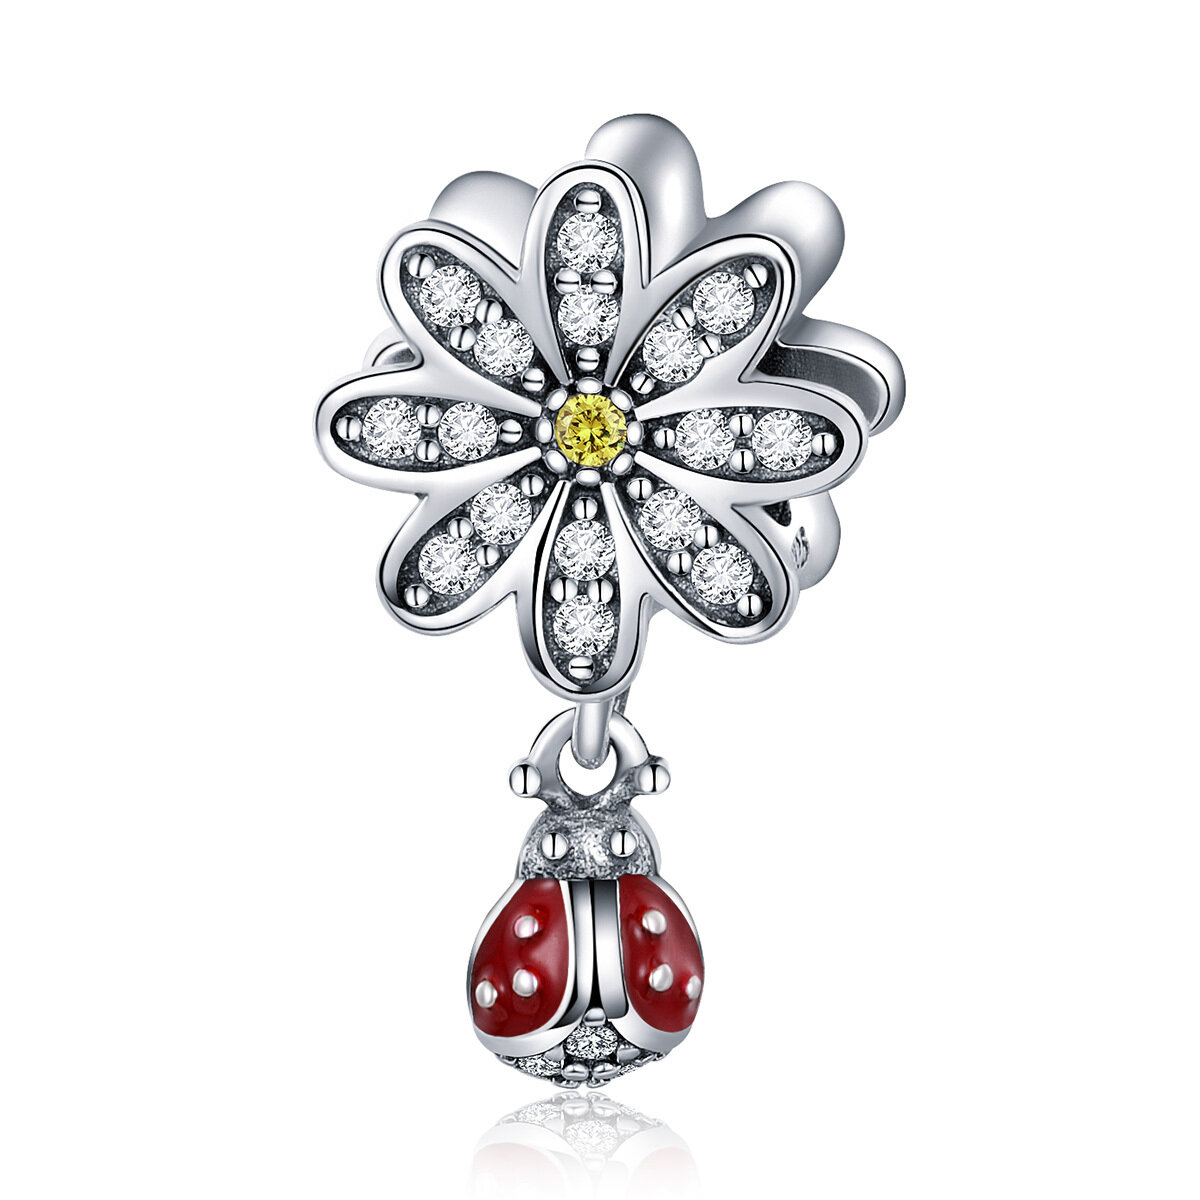 GemKing SCC727 story of the Ladybug S925 Sterling Silver Charm